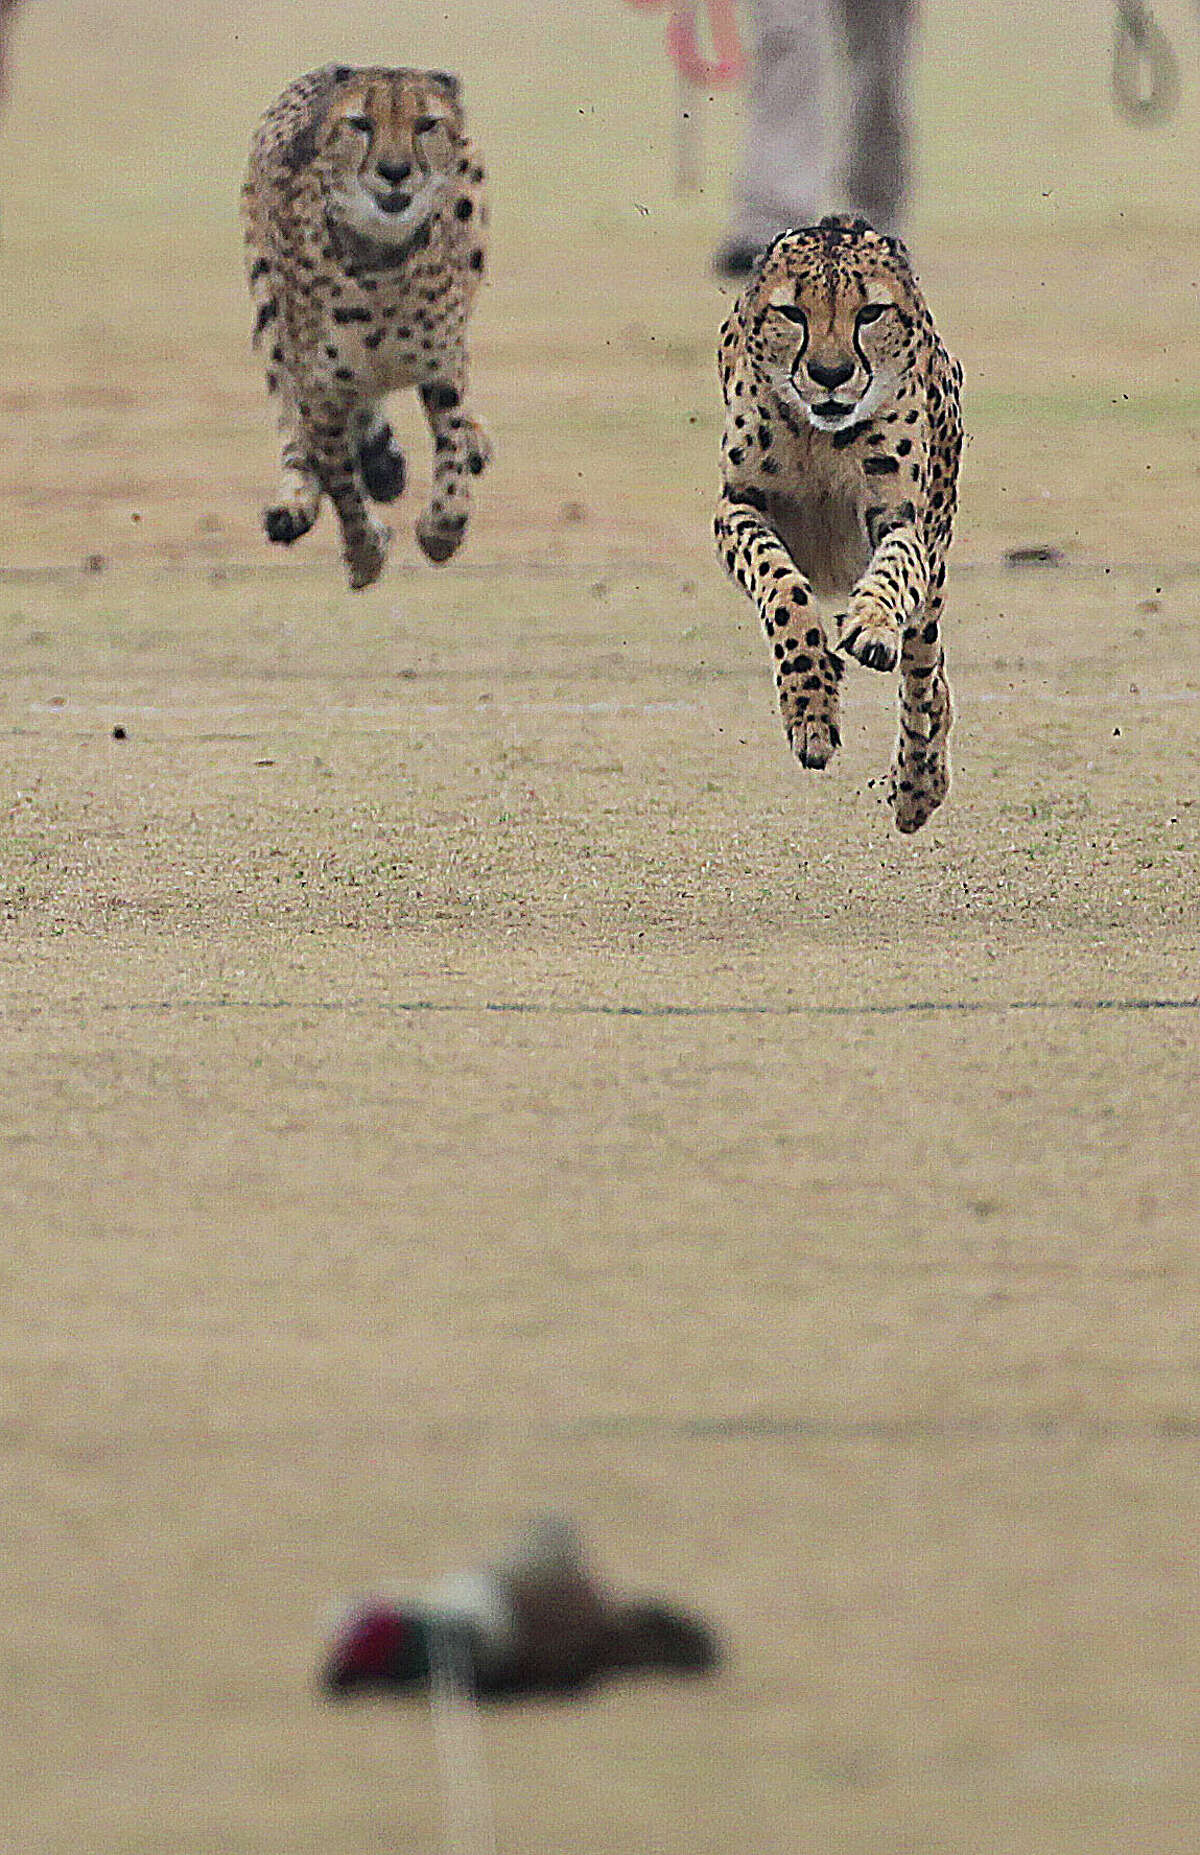 The Houston Zoo's two male cheetahs Kito and Kiburi running off leash at the Houston Dynamo's practice field located at Houston Sports Park Wednesday, Dec. 4, 2013, in Houston. Today is International Cheetah Day.